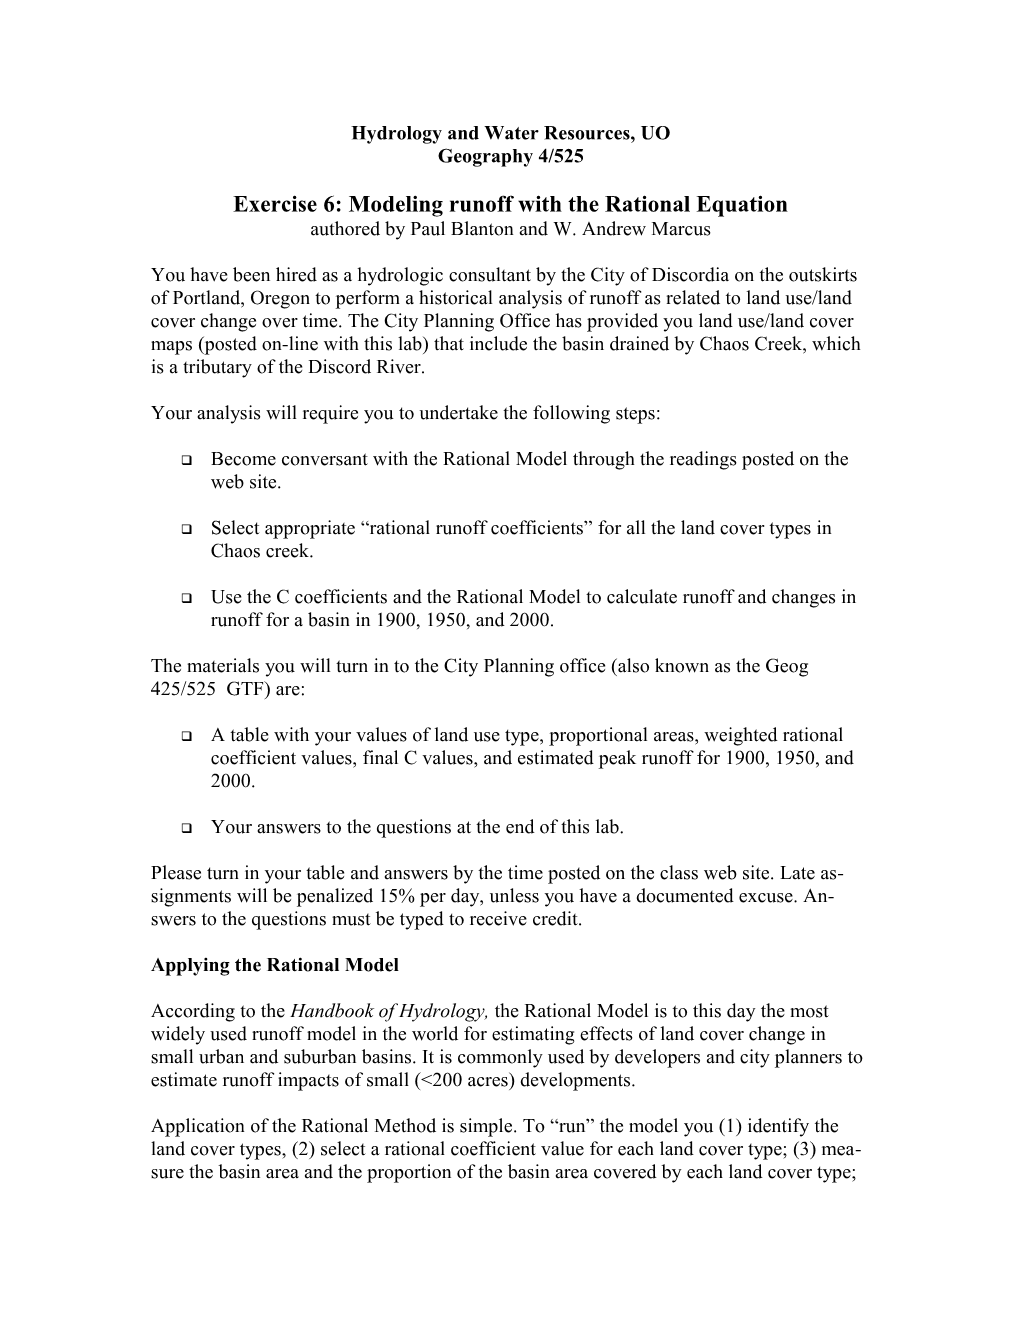 Exercise #7: Modeling Runoff with the Rational Equation